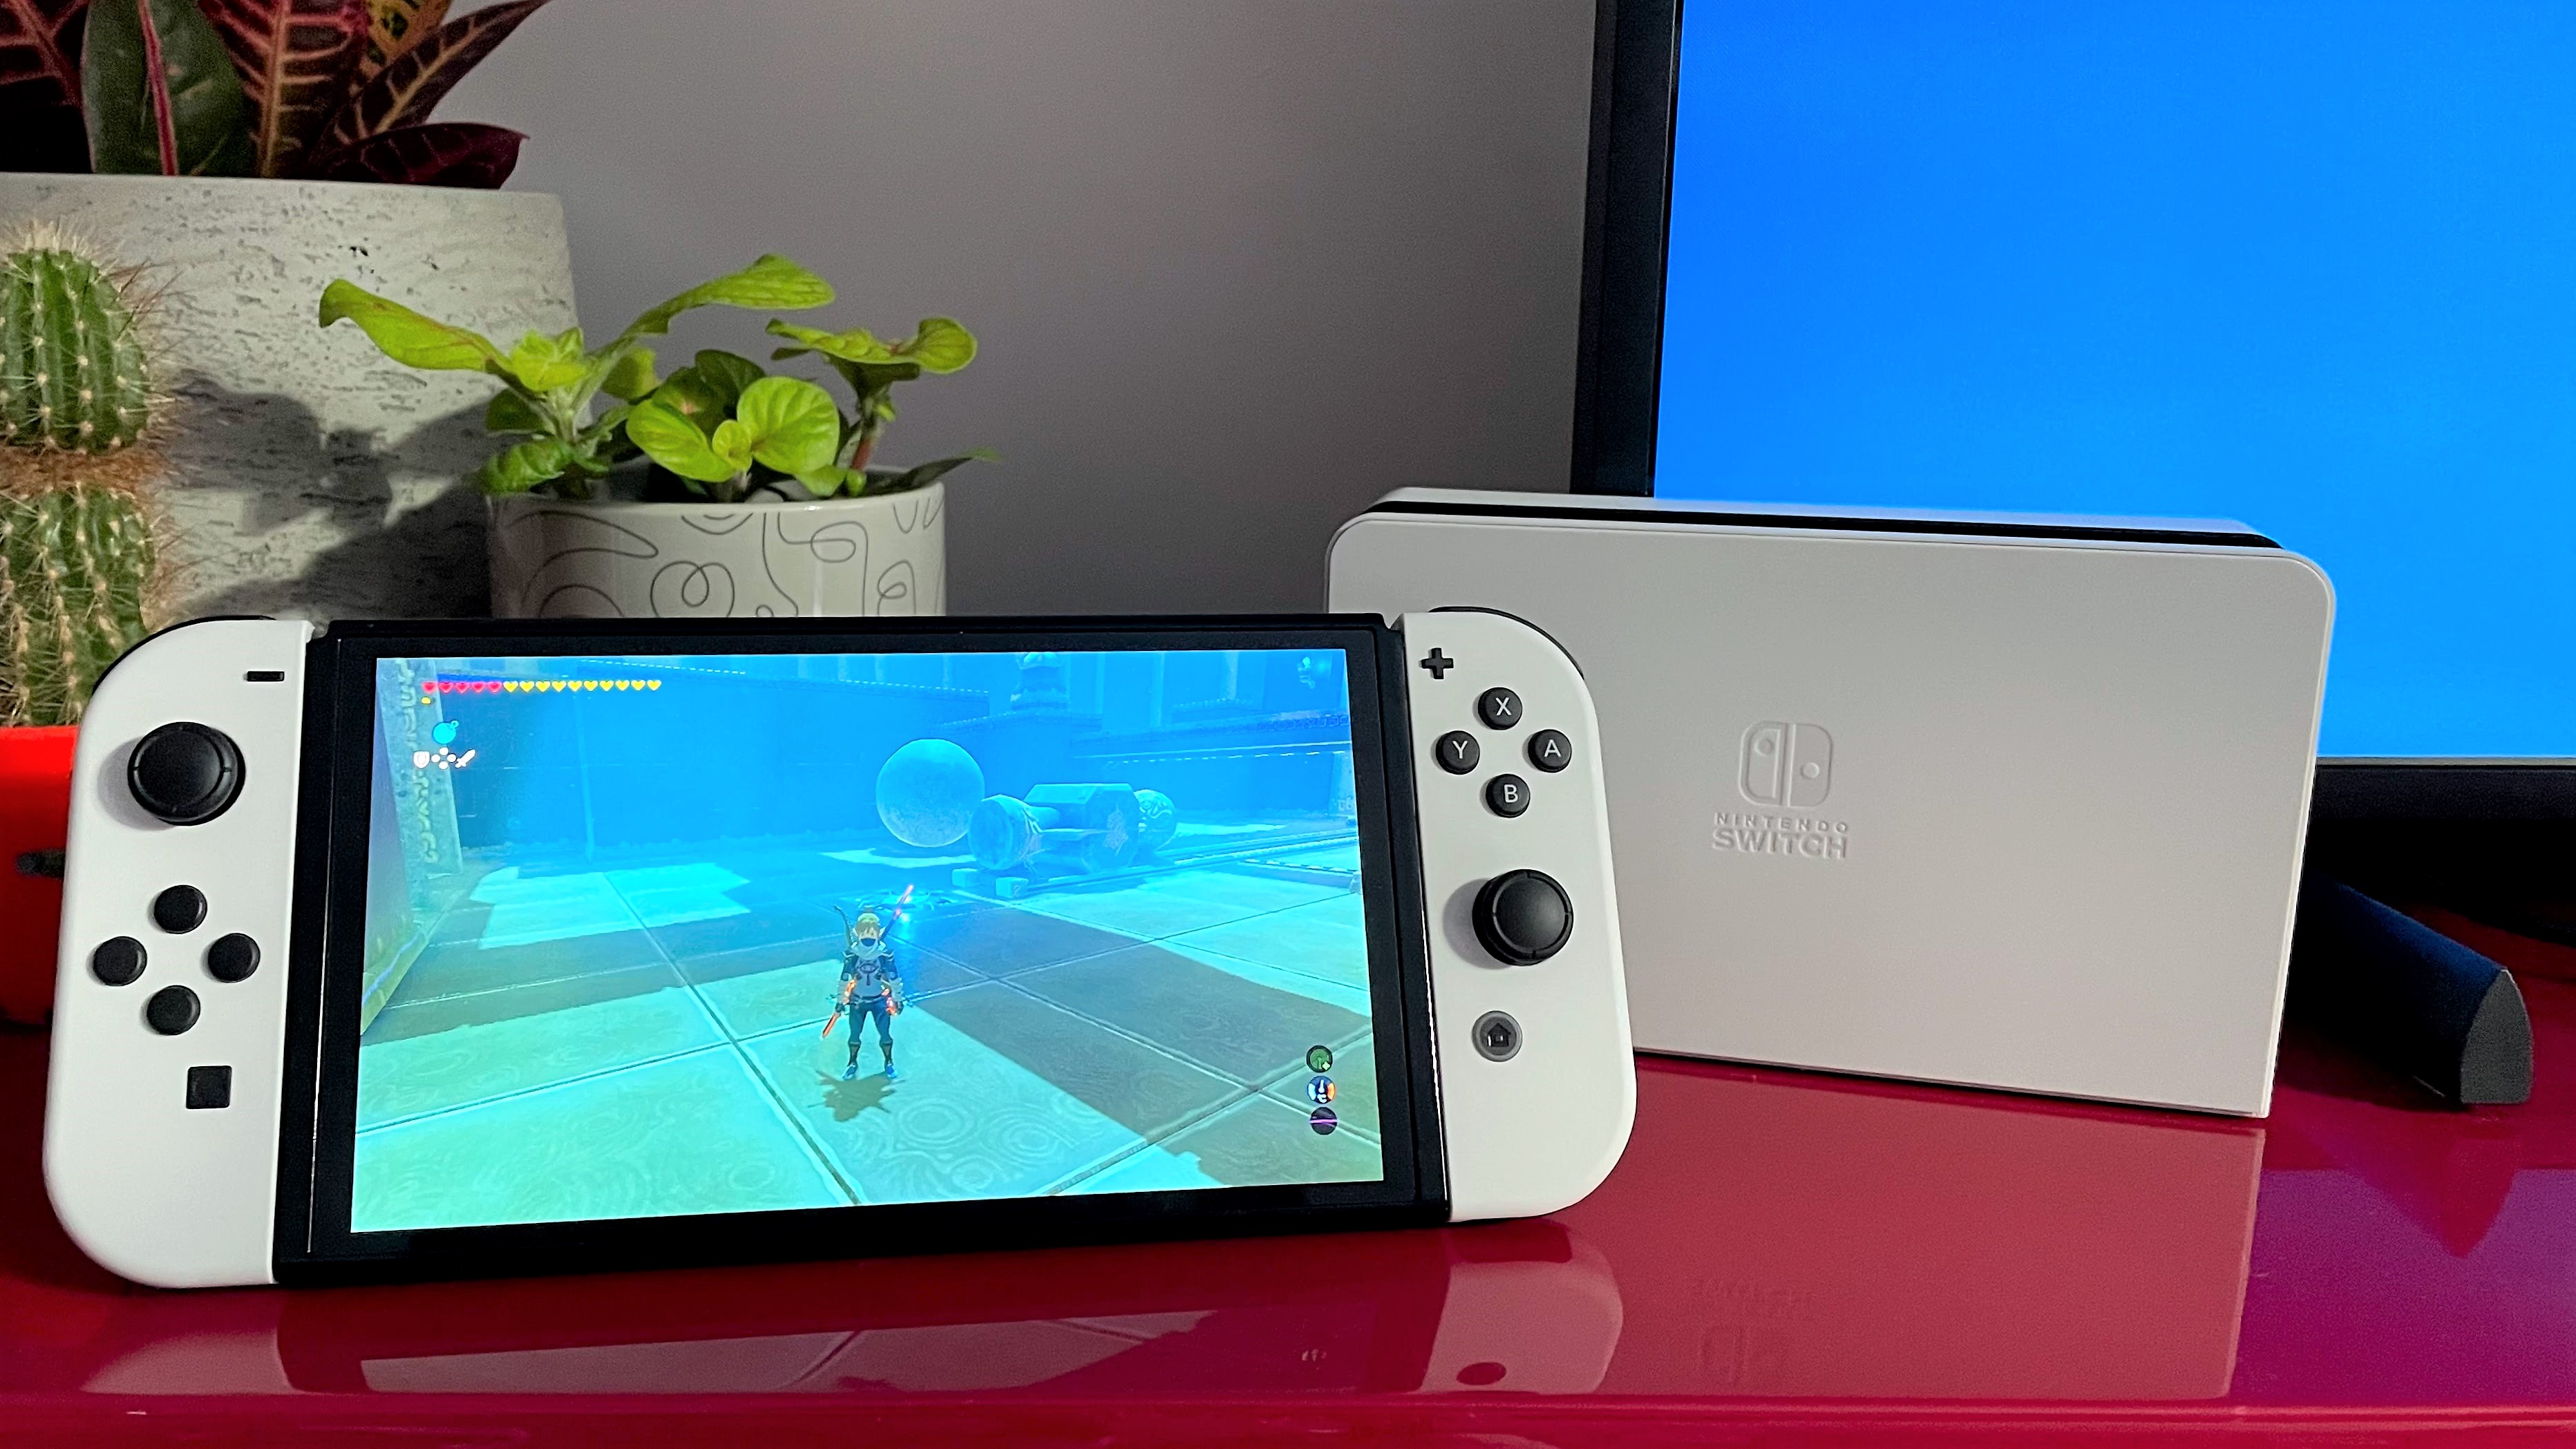 Nintendo Switch OLED Vs Nintendo Switch: What's Different? | lupon.gov.ph